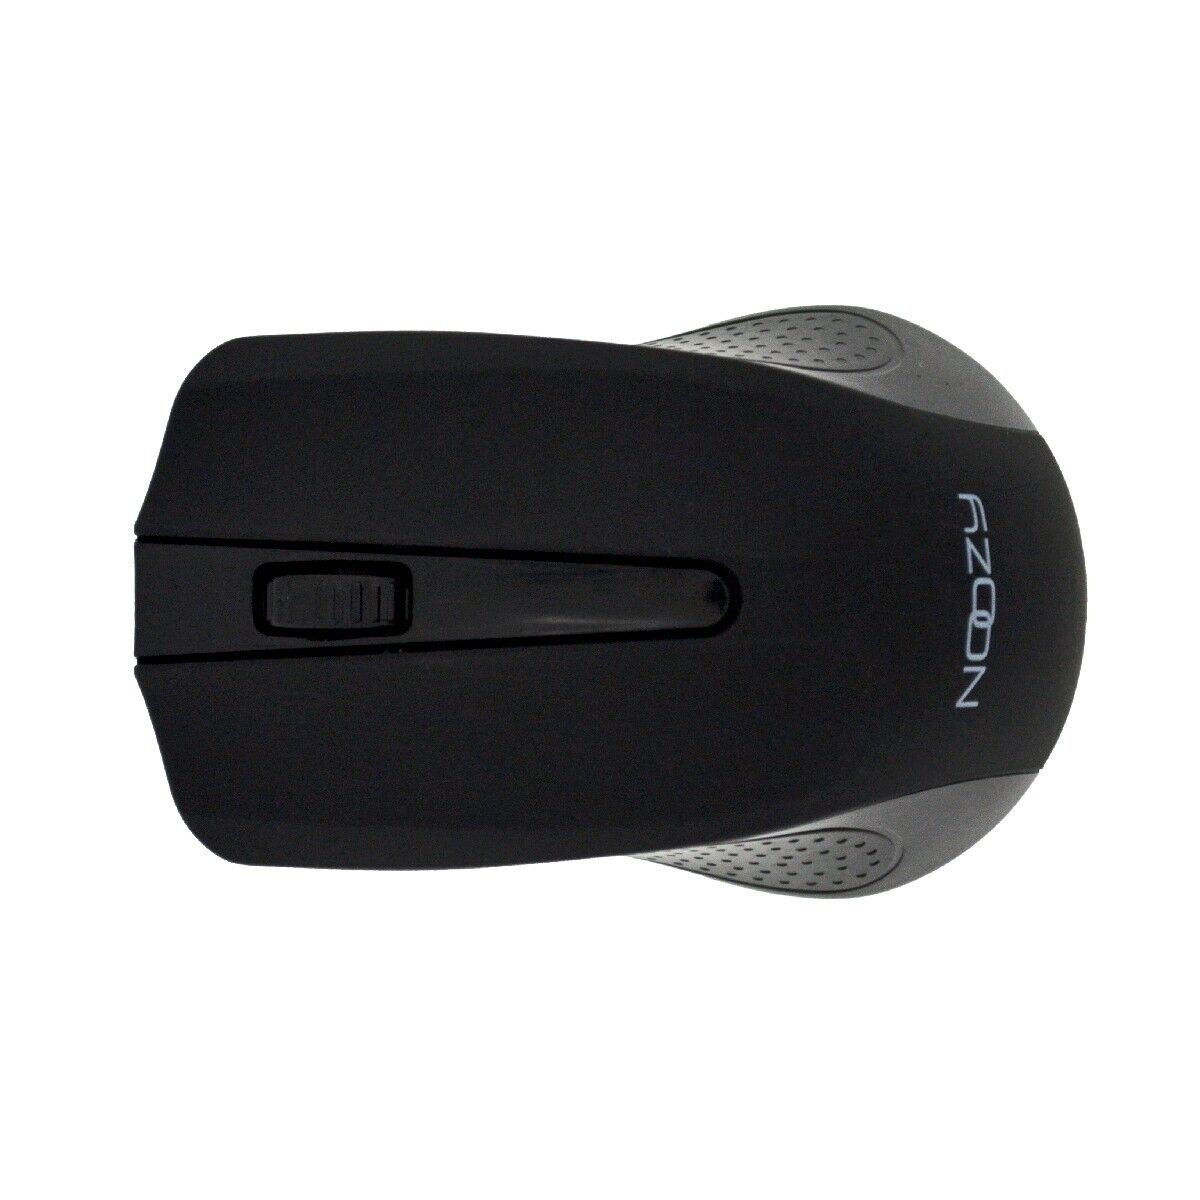 Wireless Mouse Noozy SW-31 USB 3D 3 Buttons 1000DPI Black